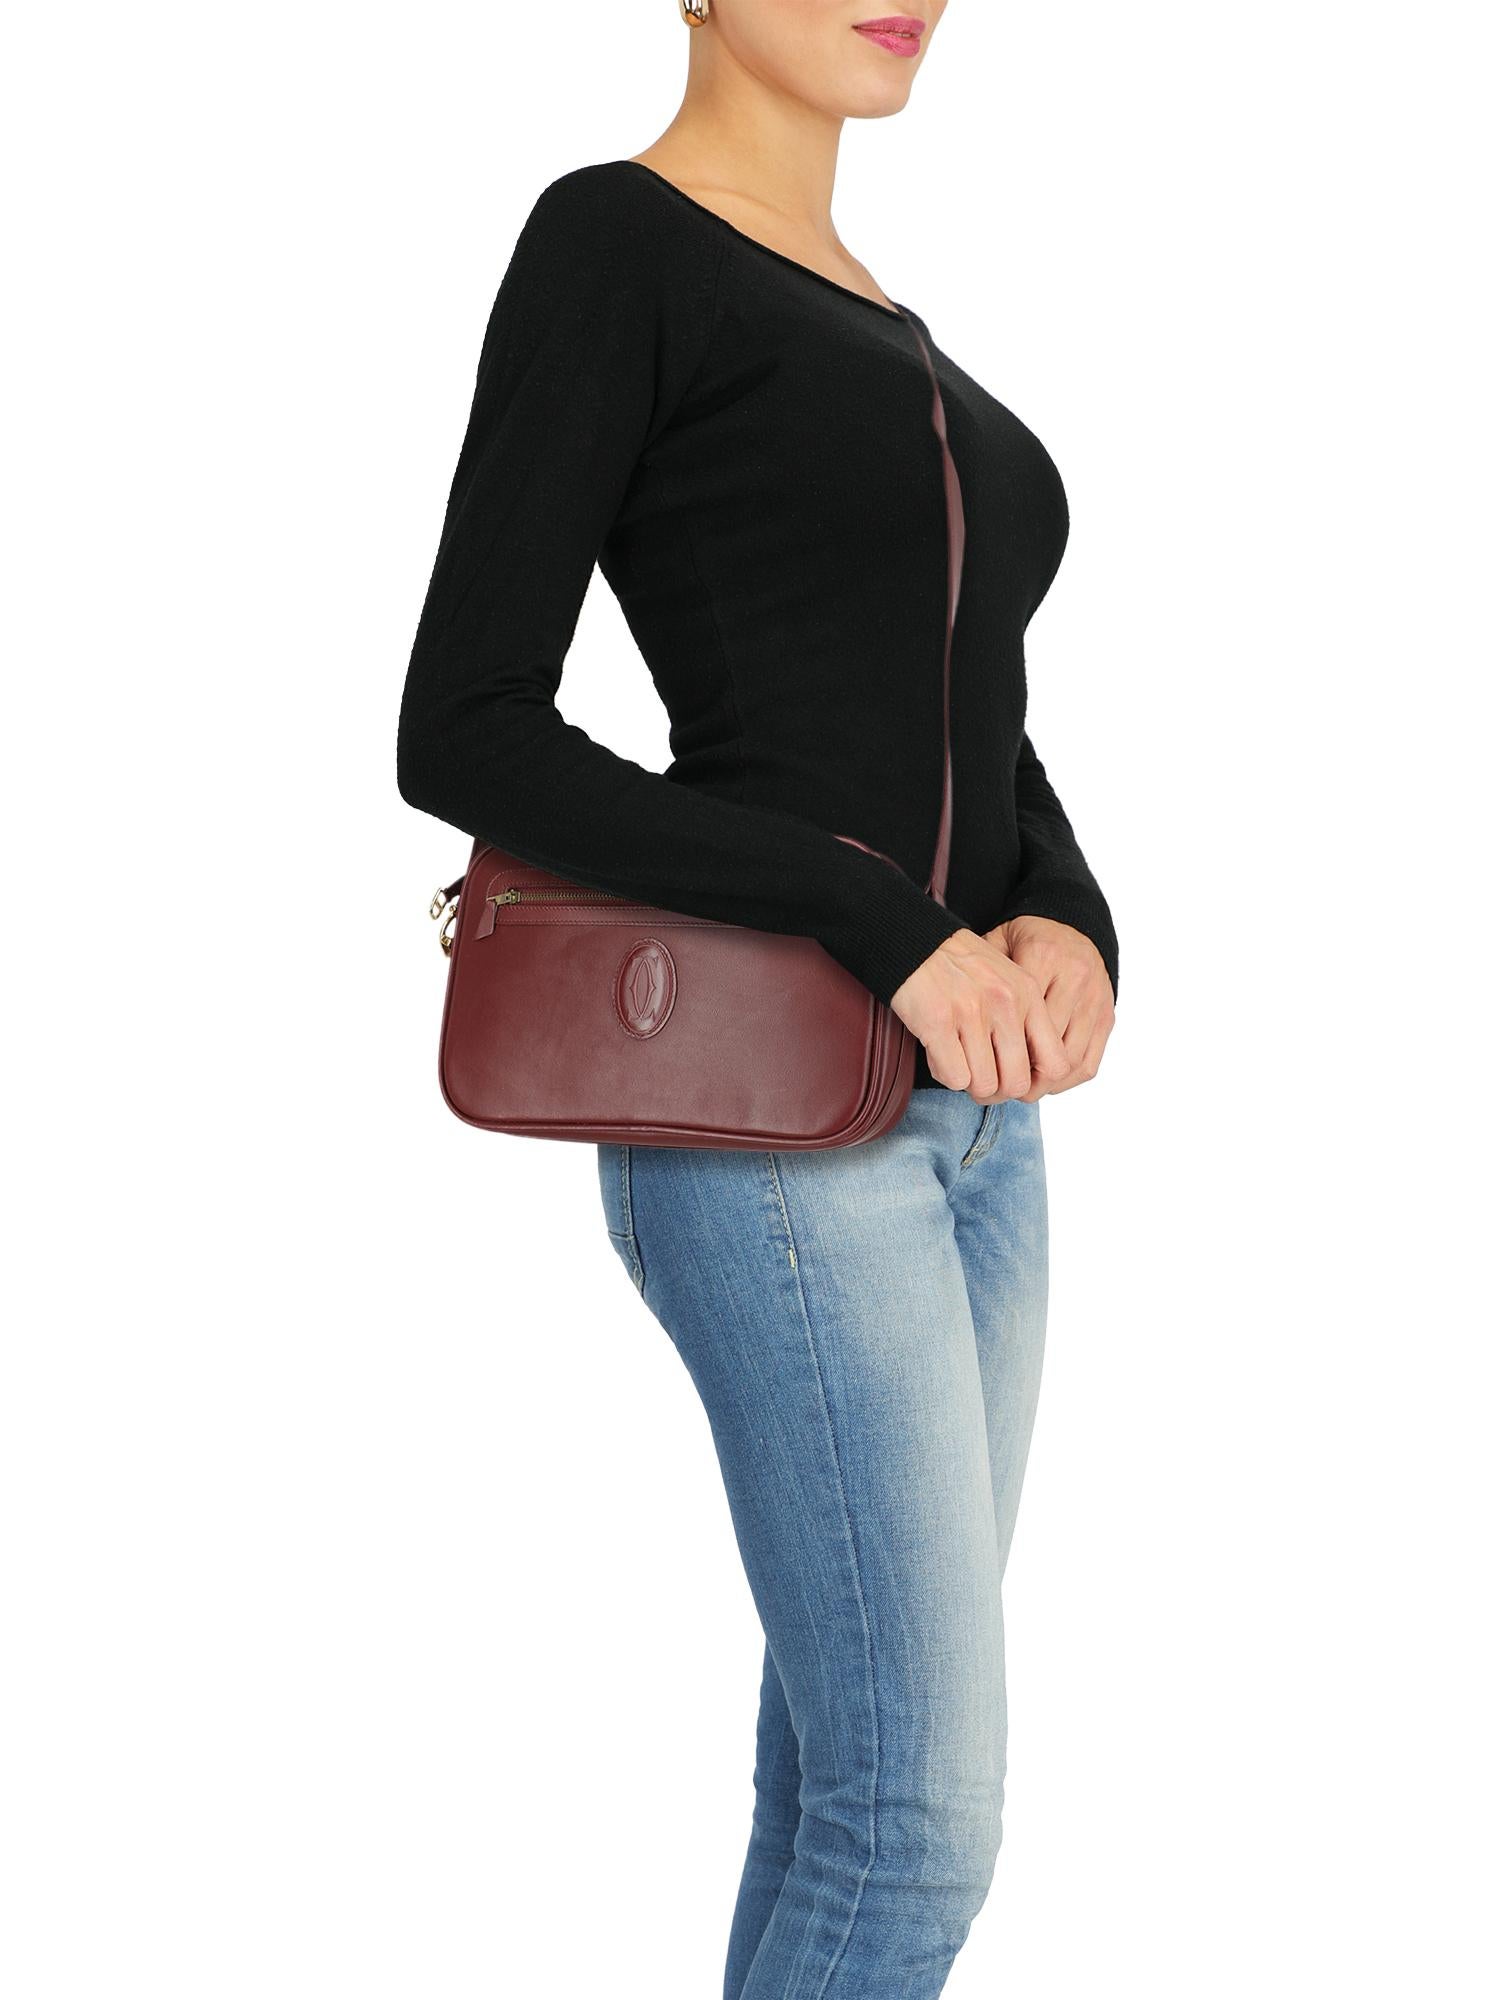 Cross body bag, leather, solid color, front logo, zipper fastening, gold-tone hardware, internal zipped pocket, day bag

Includes:
- Box
- Product care
- Dust bag

Product Condition: Very Good
Lining: negligible residues. Hardware: slightly visible